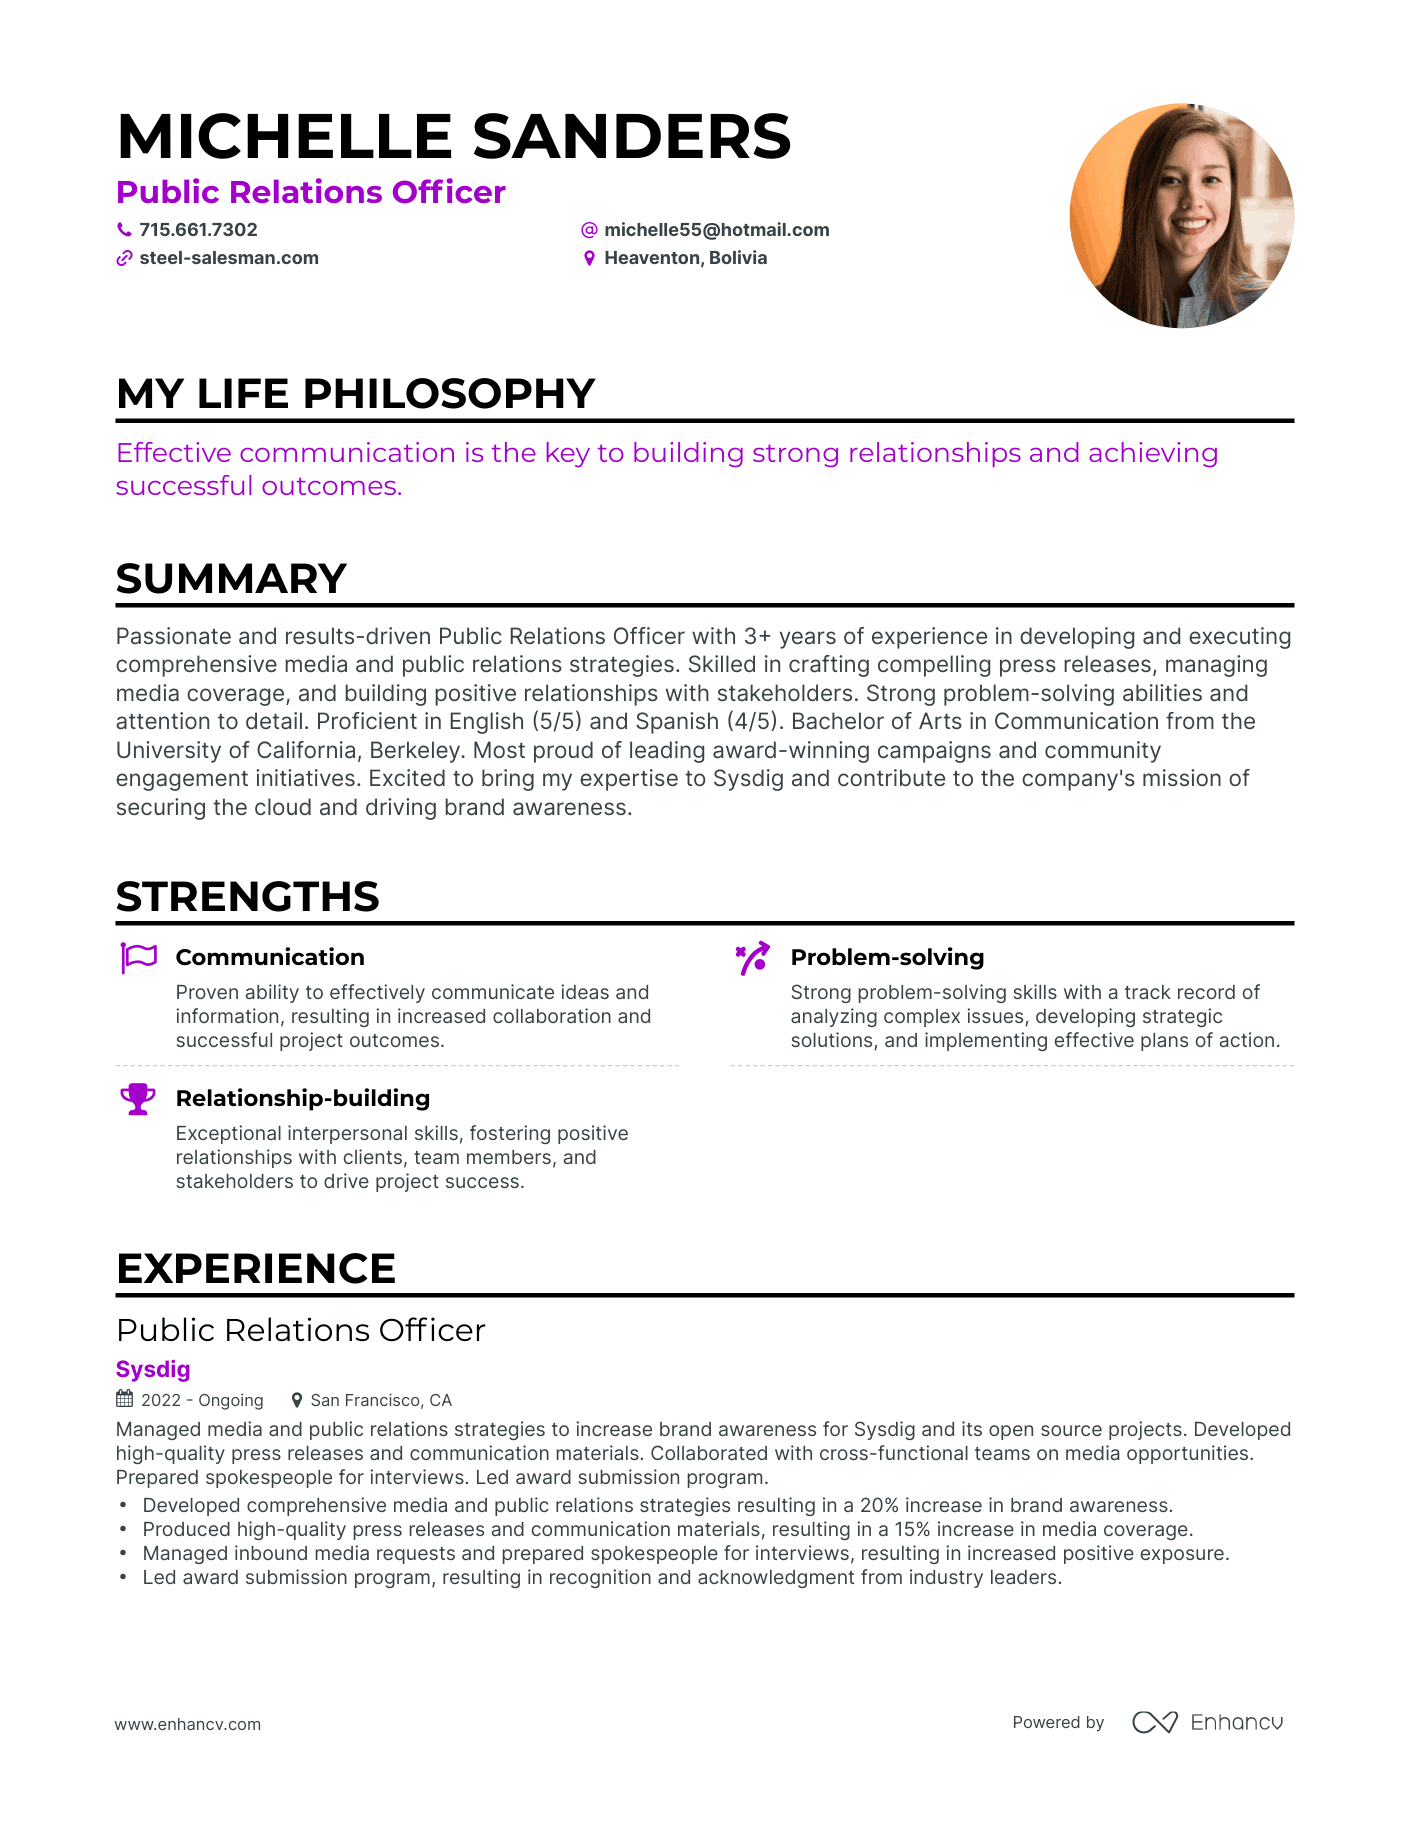 Creative Public Relations Officer Resume Example